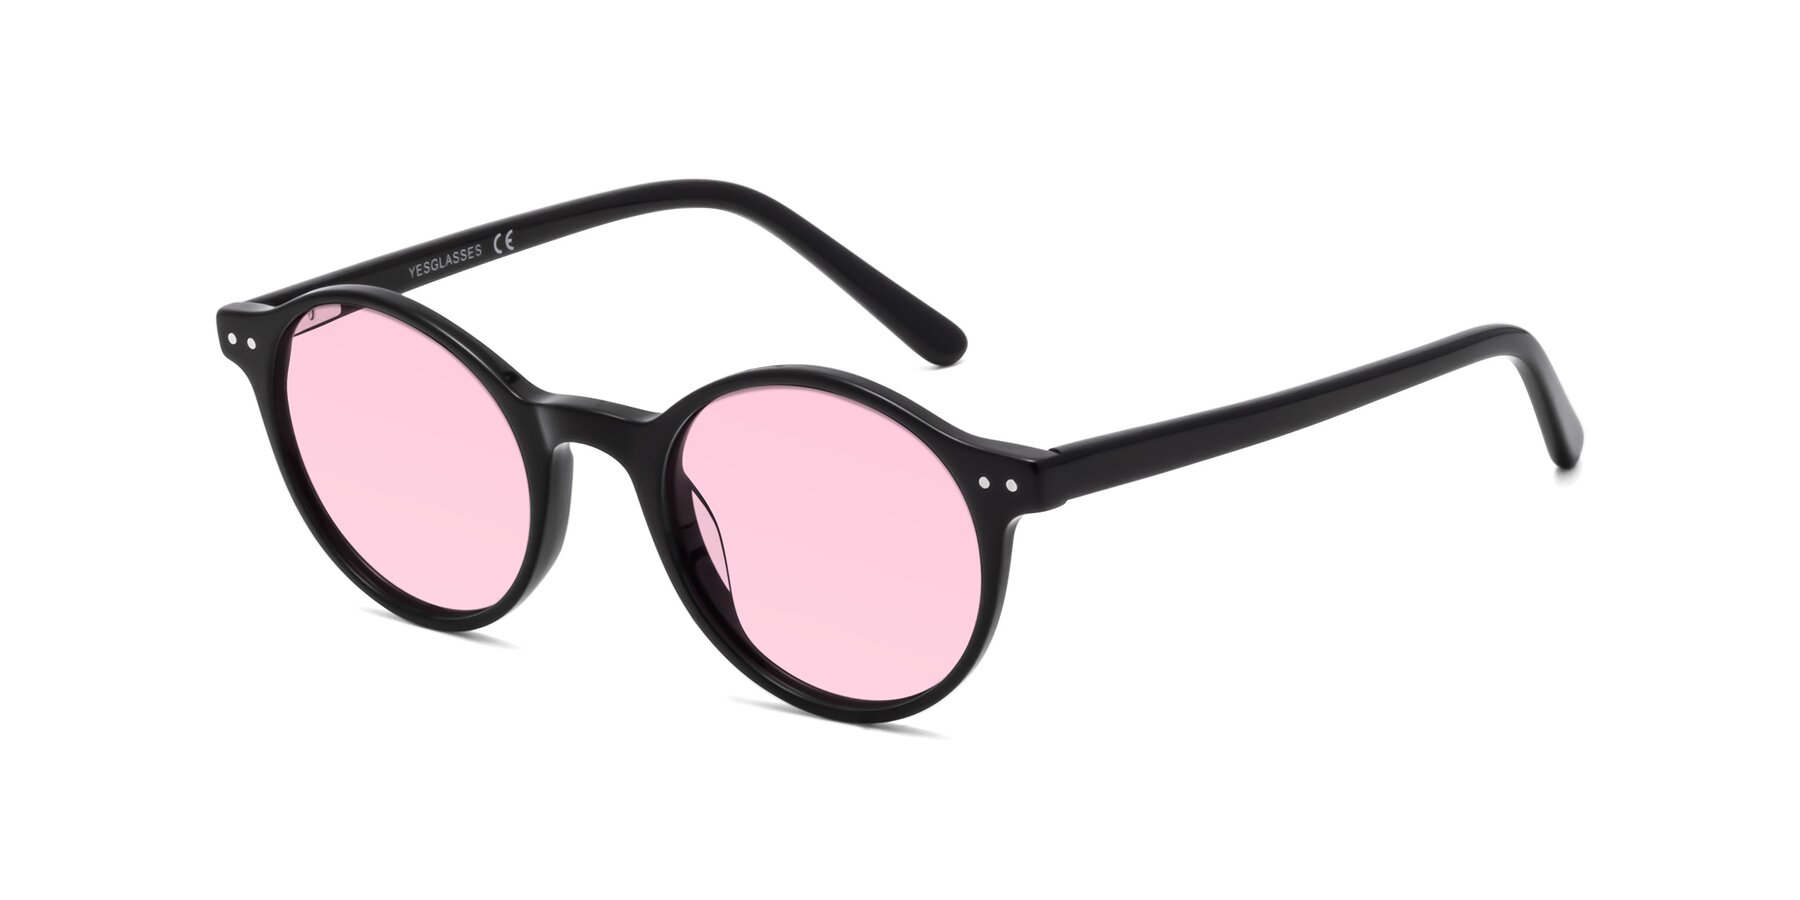 Angle of 17519 in Black with Light Pink Tinted Lenses